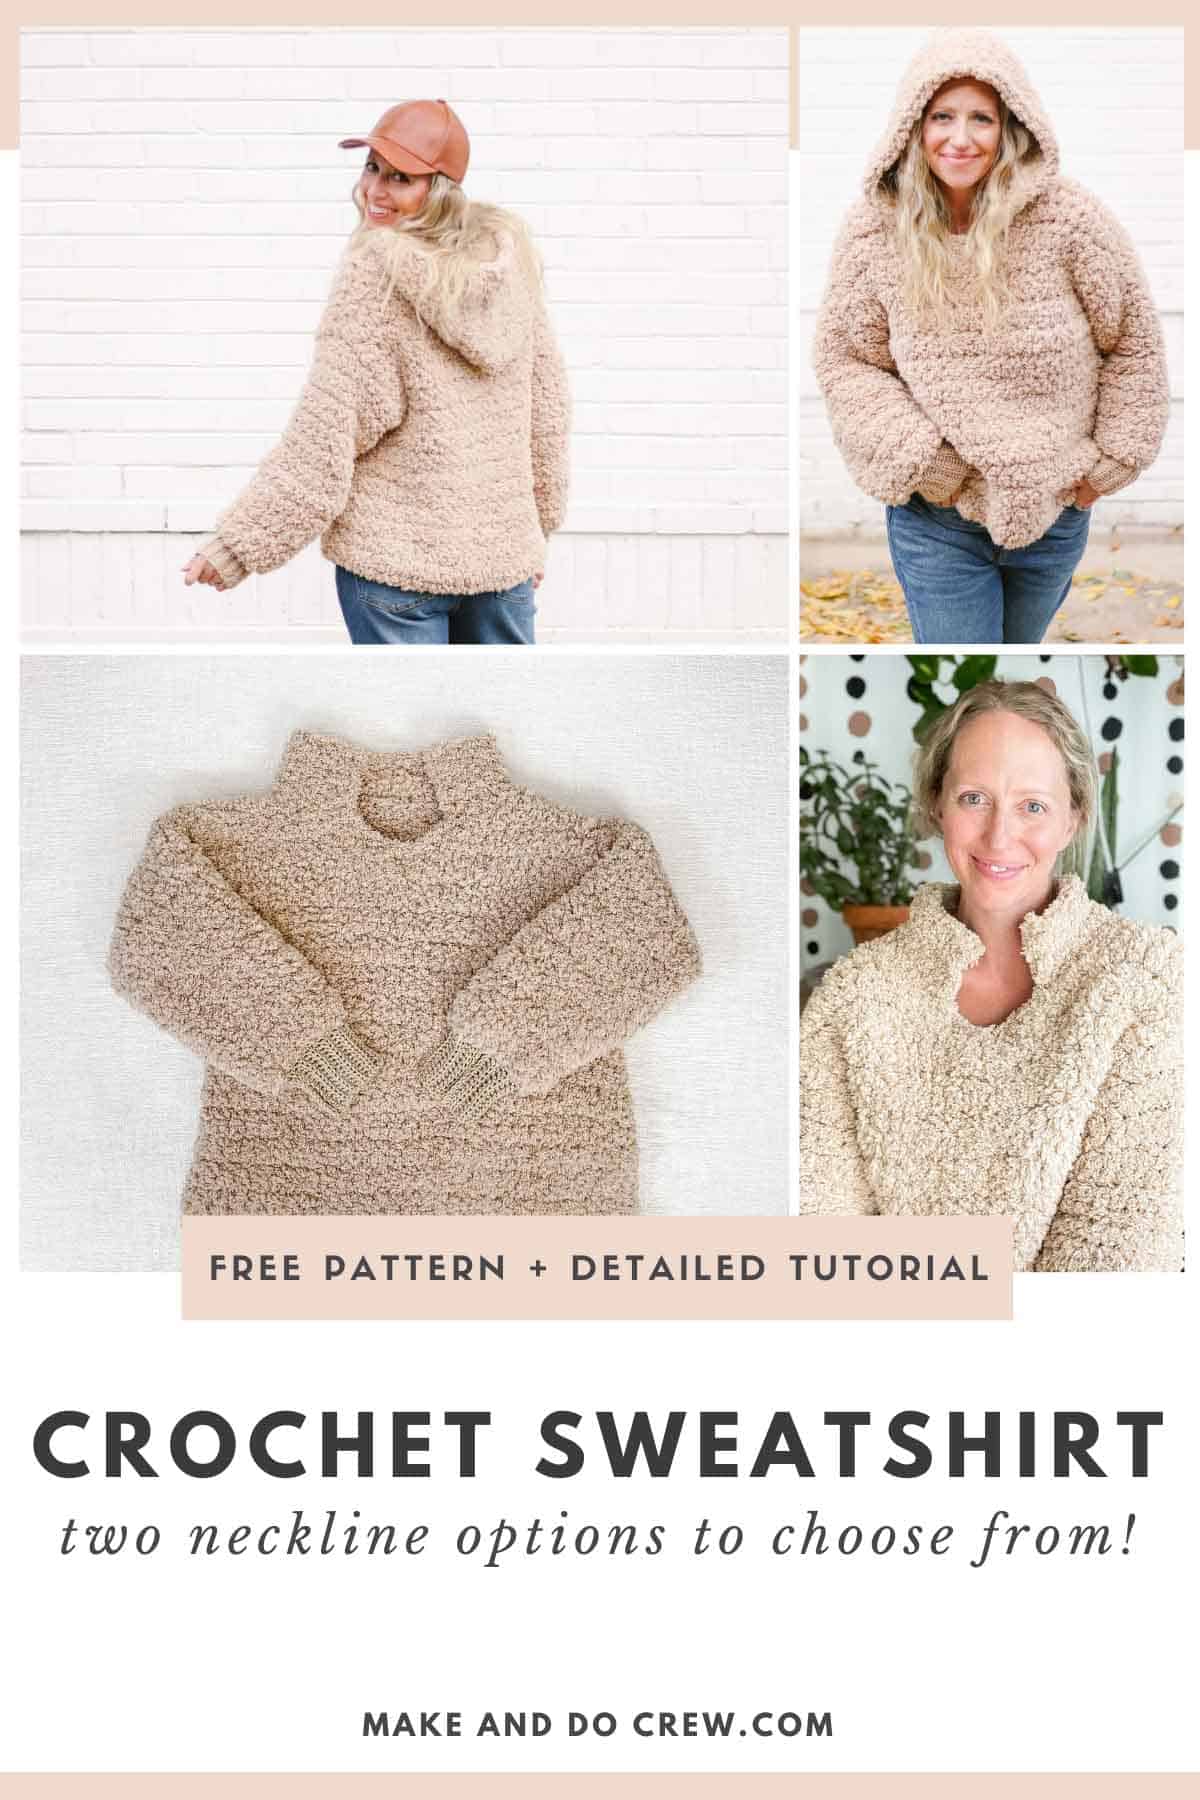 Grid of images showing a free crochet sweater with hood pattern for women. There is a blonde woman modeling the crochet sweatshirt to show the oversized hood, the split mock turtleneck style and the fluffy, cozy yarn.